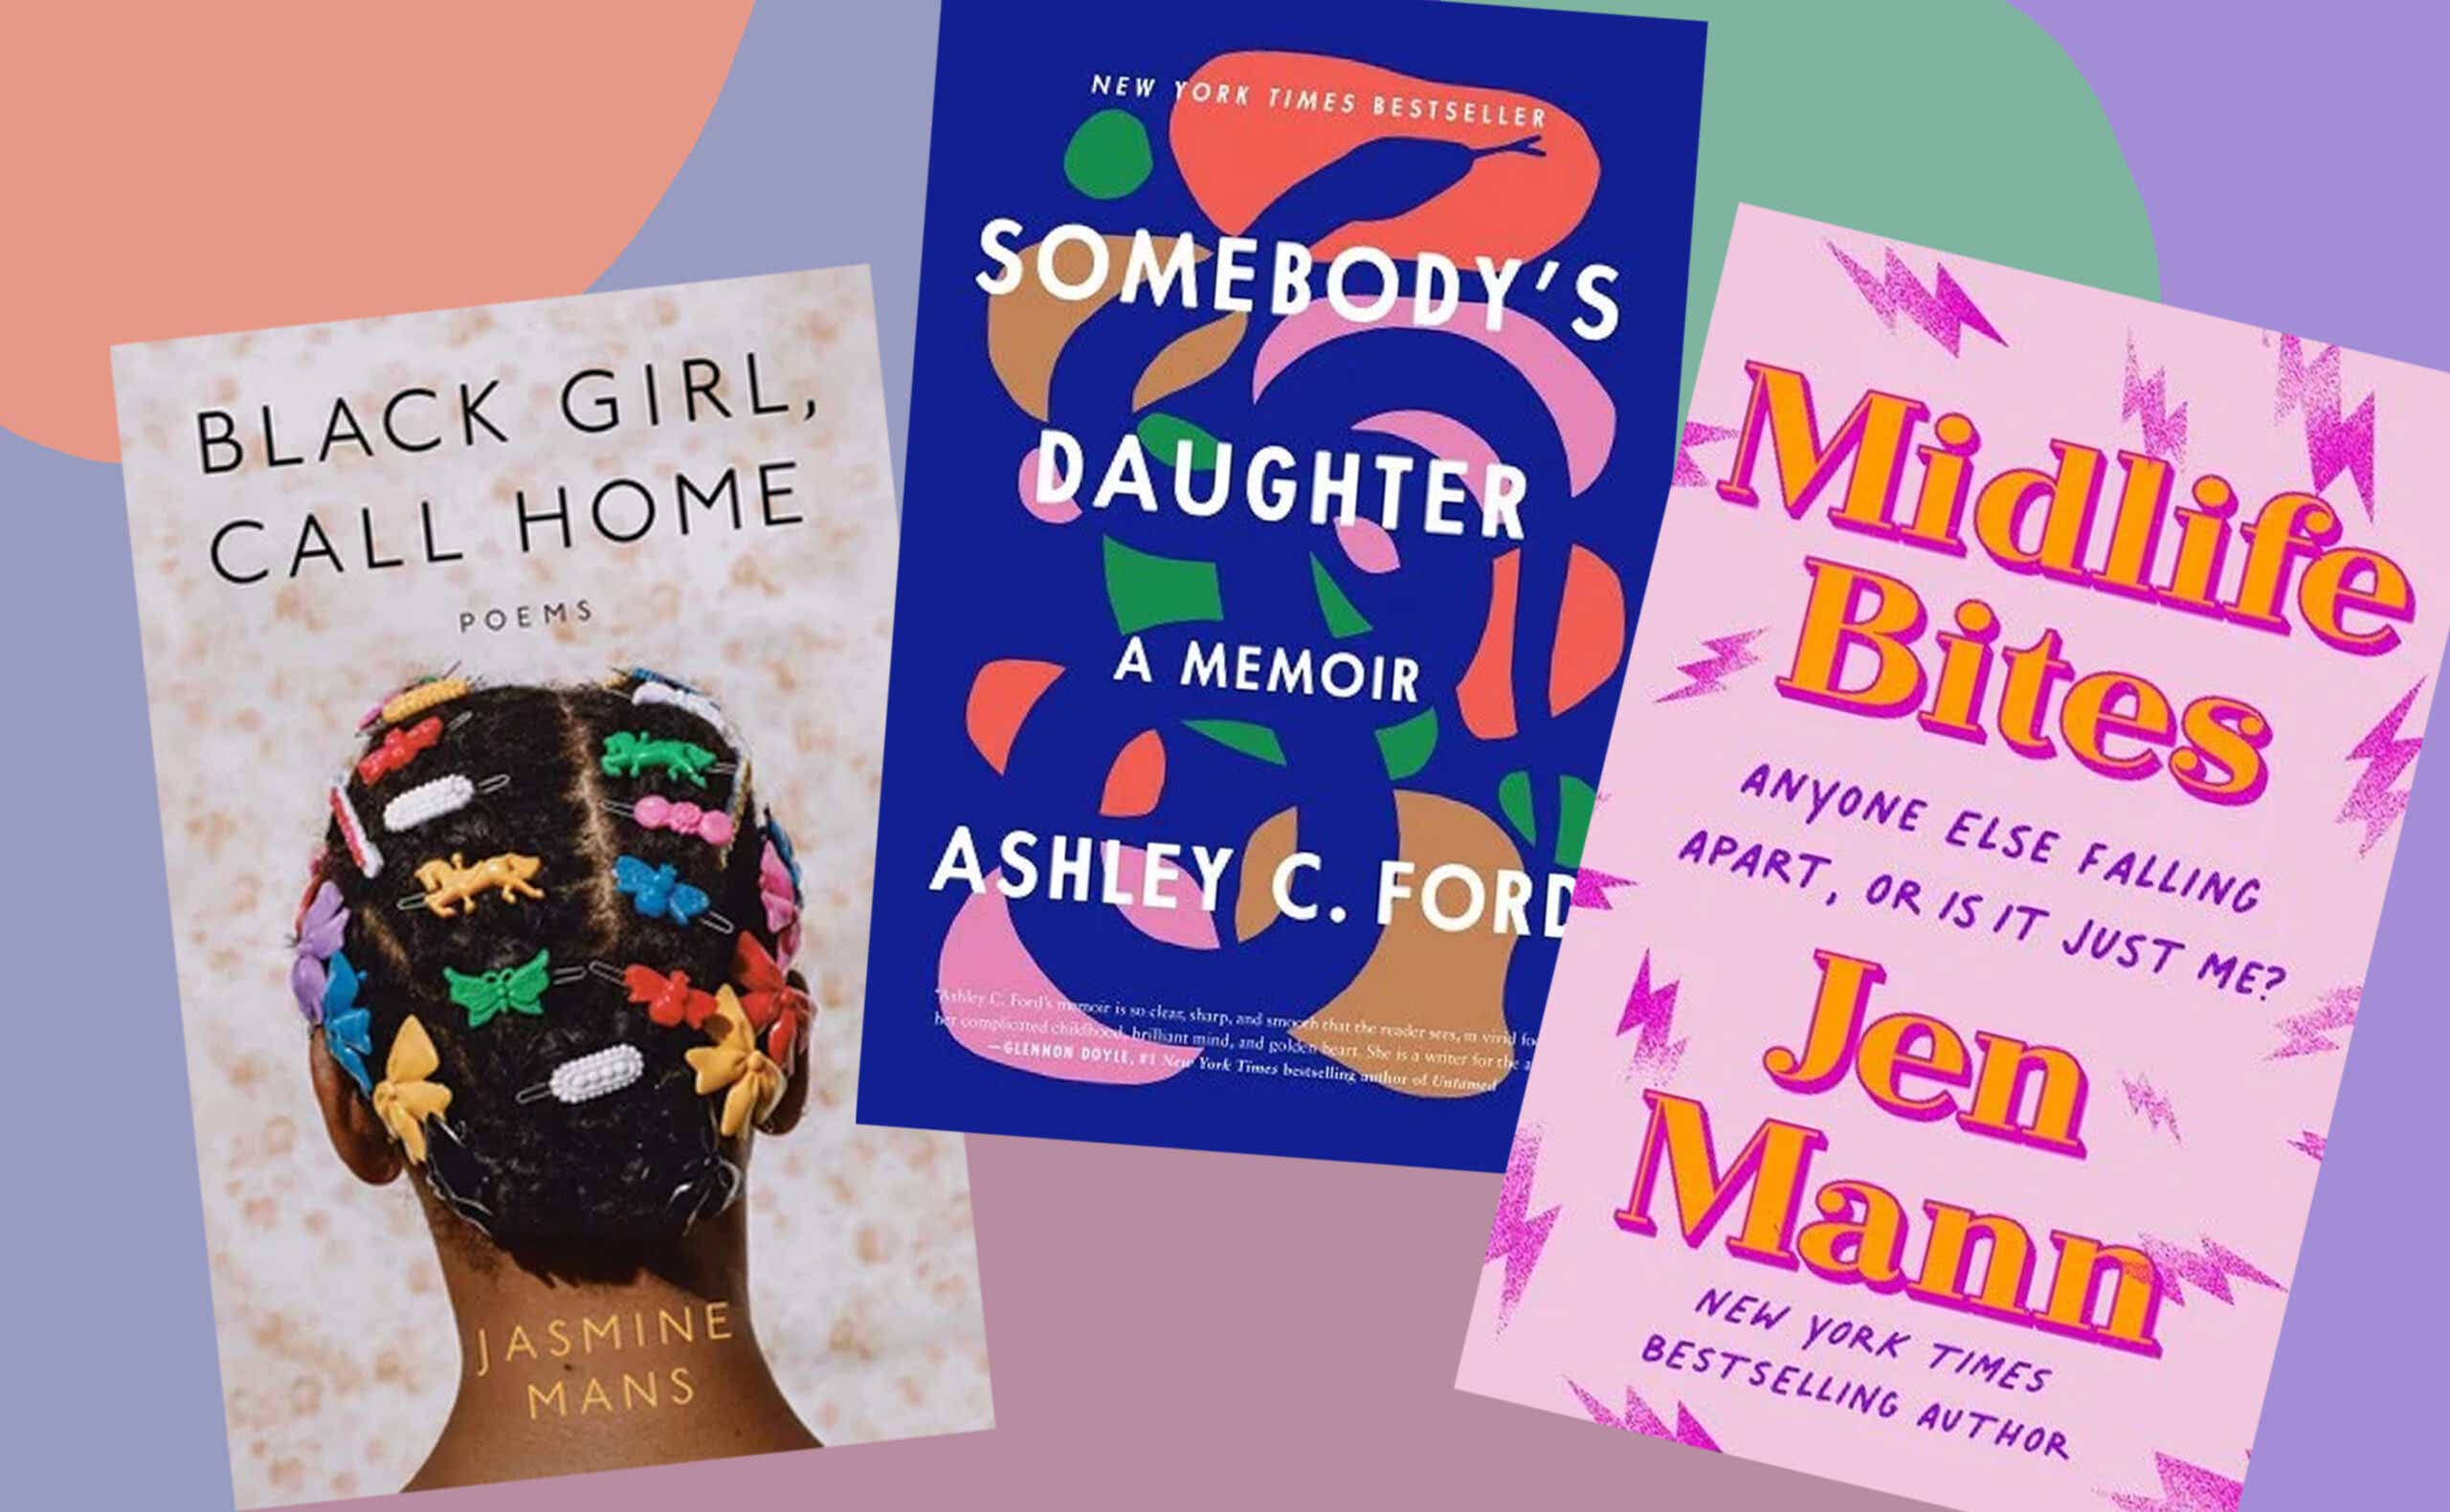 26 Great Books for Mom to Gift on Mother's Day, Her Birthday, and More